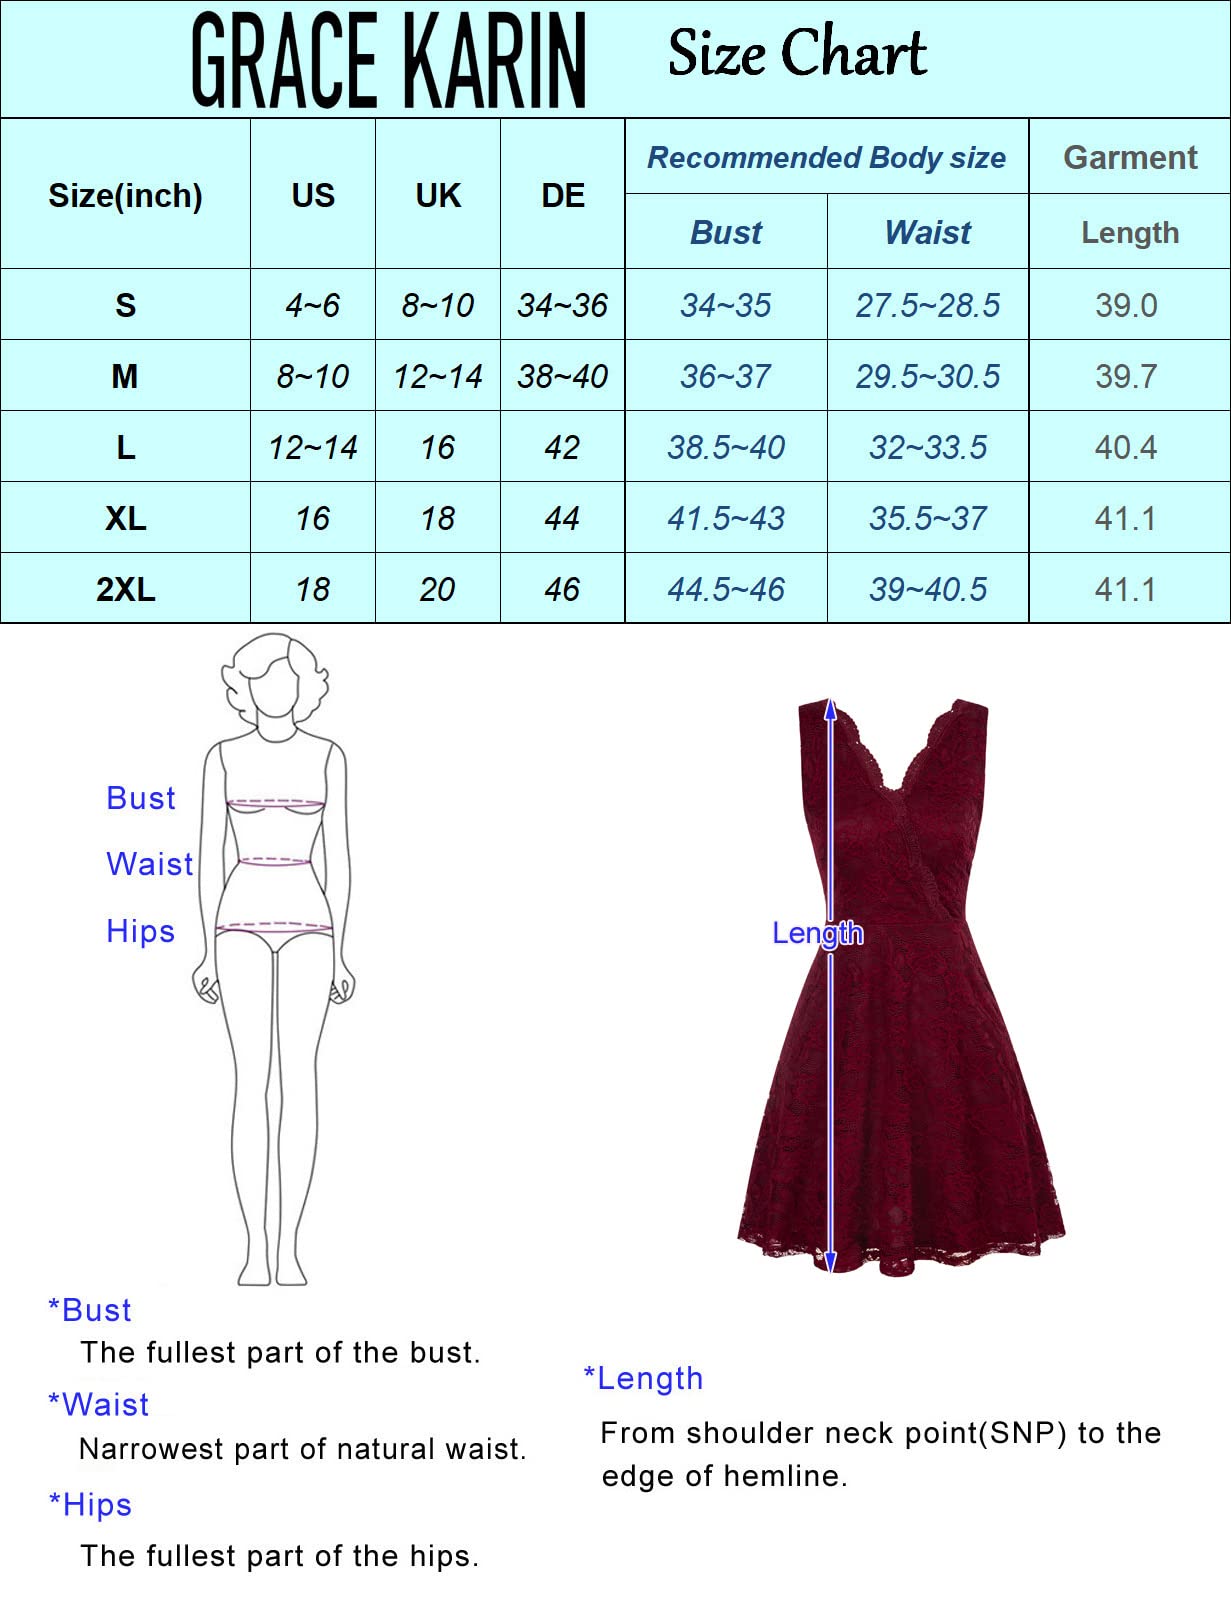 GRACE KARIN Women V-Neck Lace Sleeveless Swing A-Line Party Knee Length Dresses with Pockets